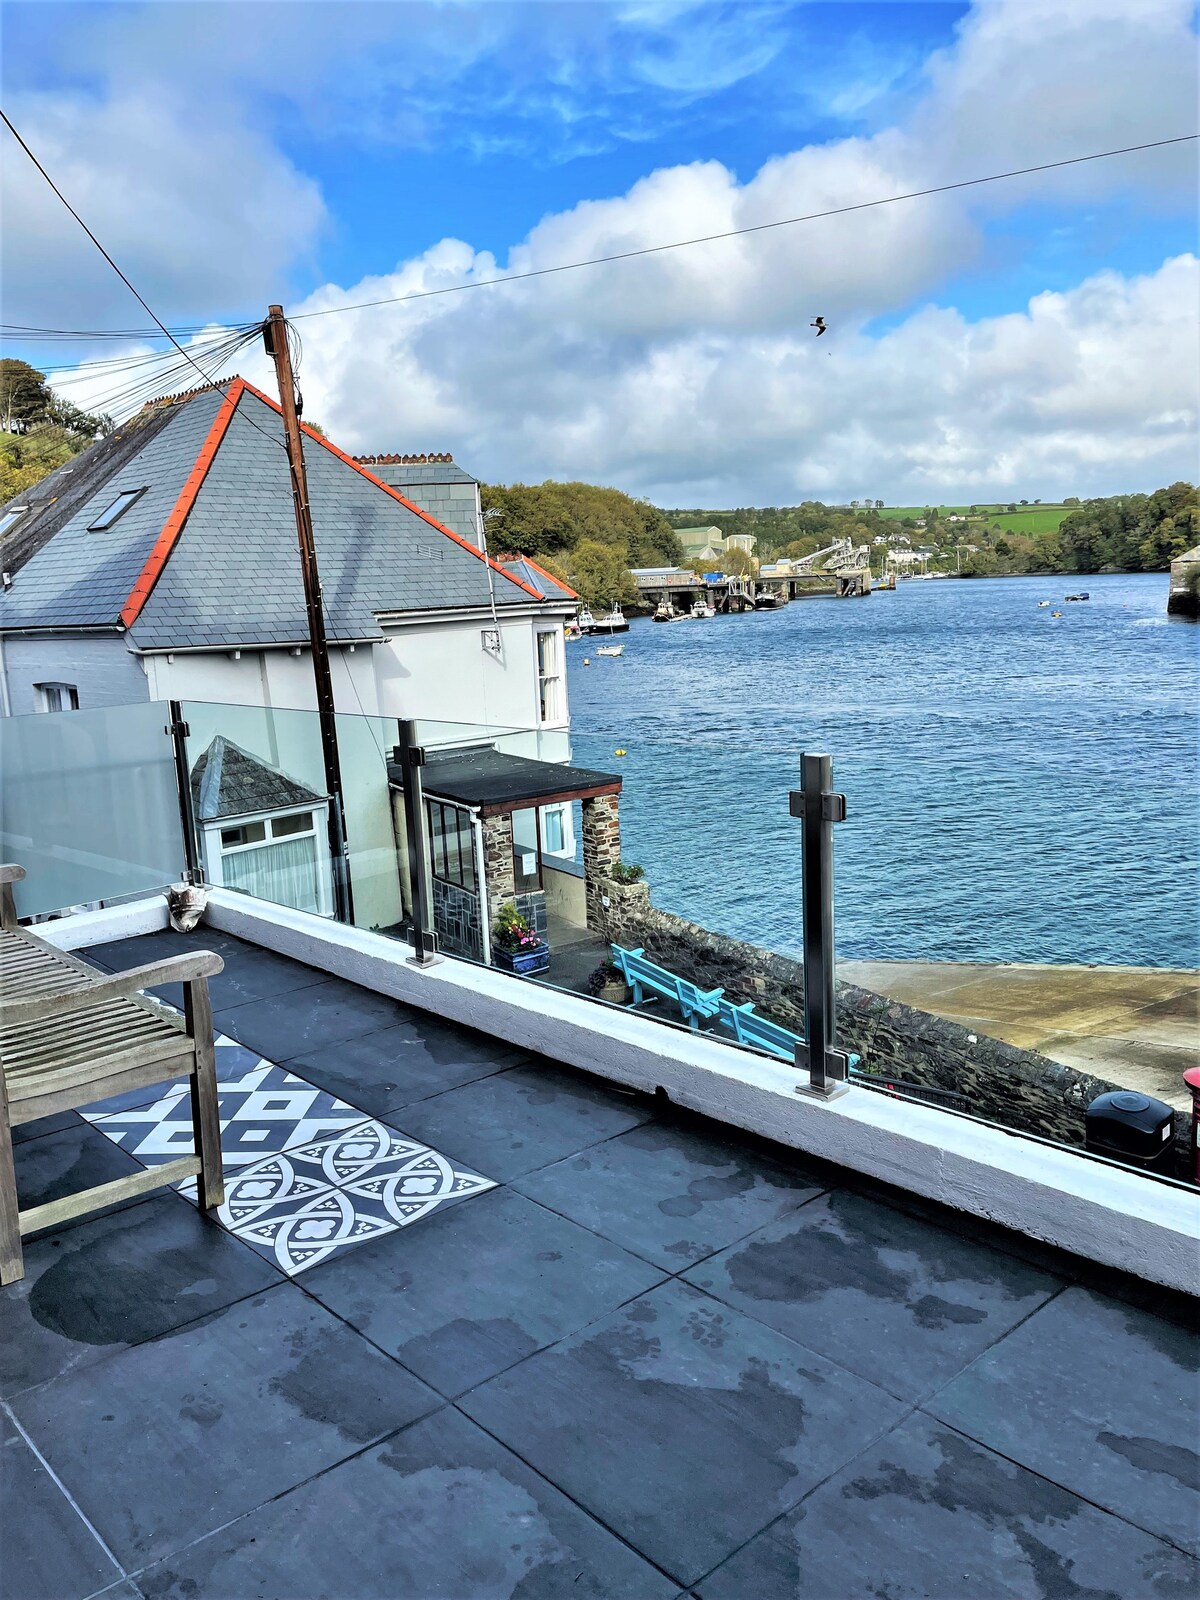 The Lookout, Fowey